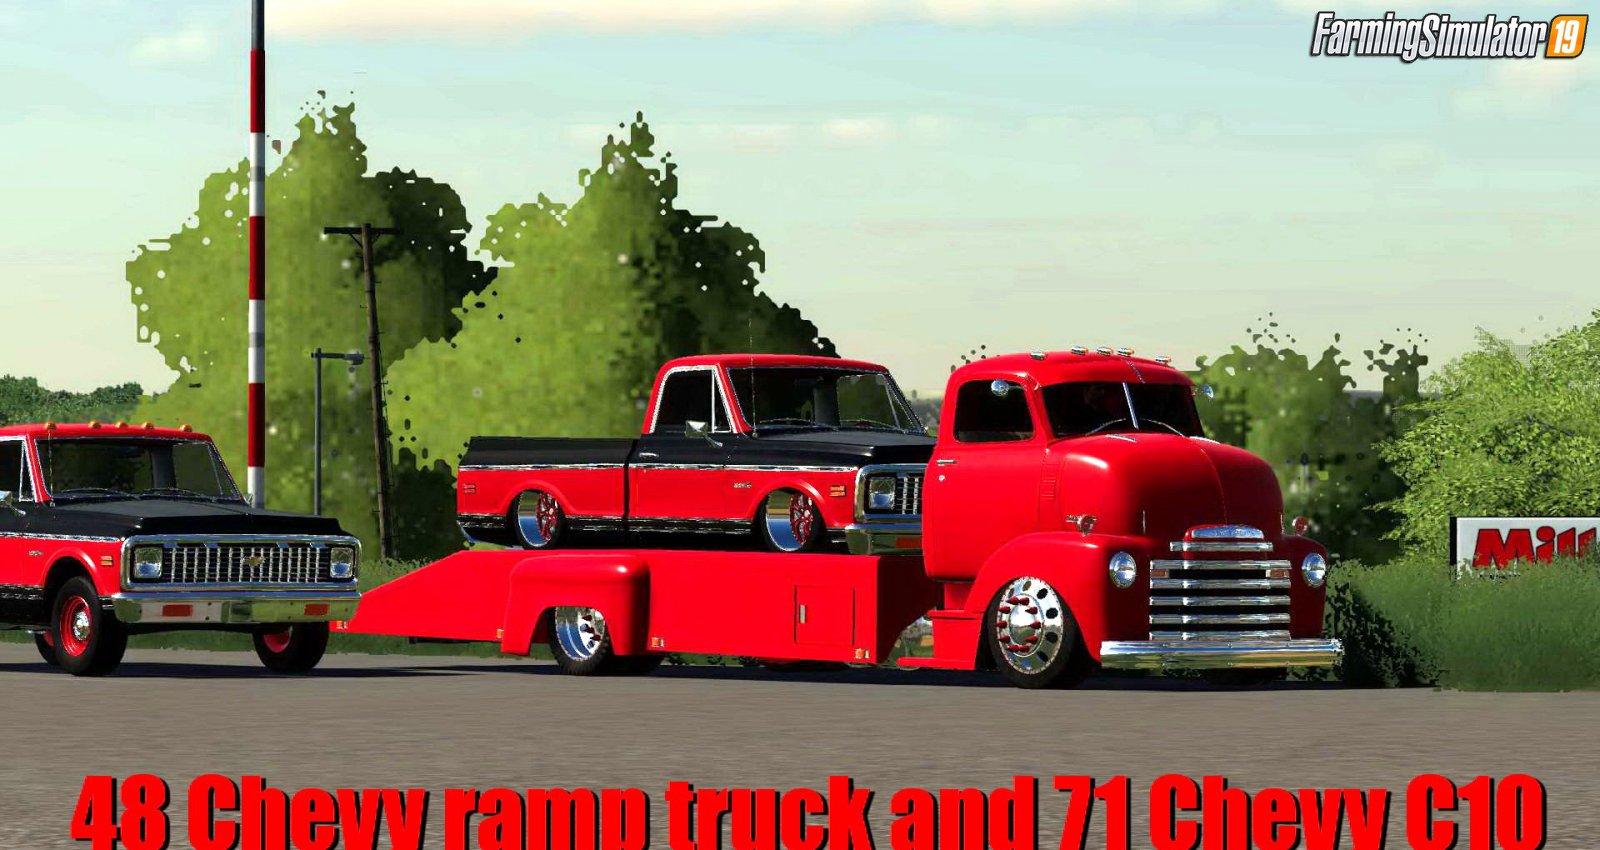 48 Chevy ramp truck and 71 Chevy C10 v1.0 for FS19